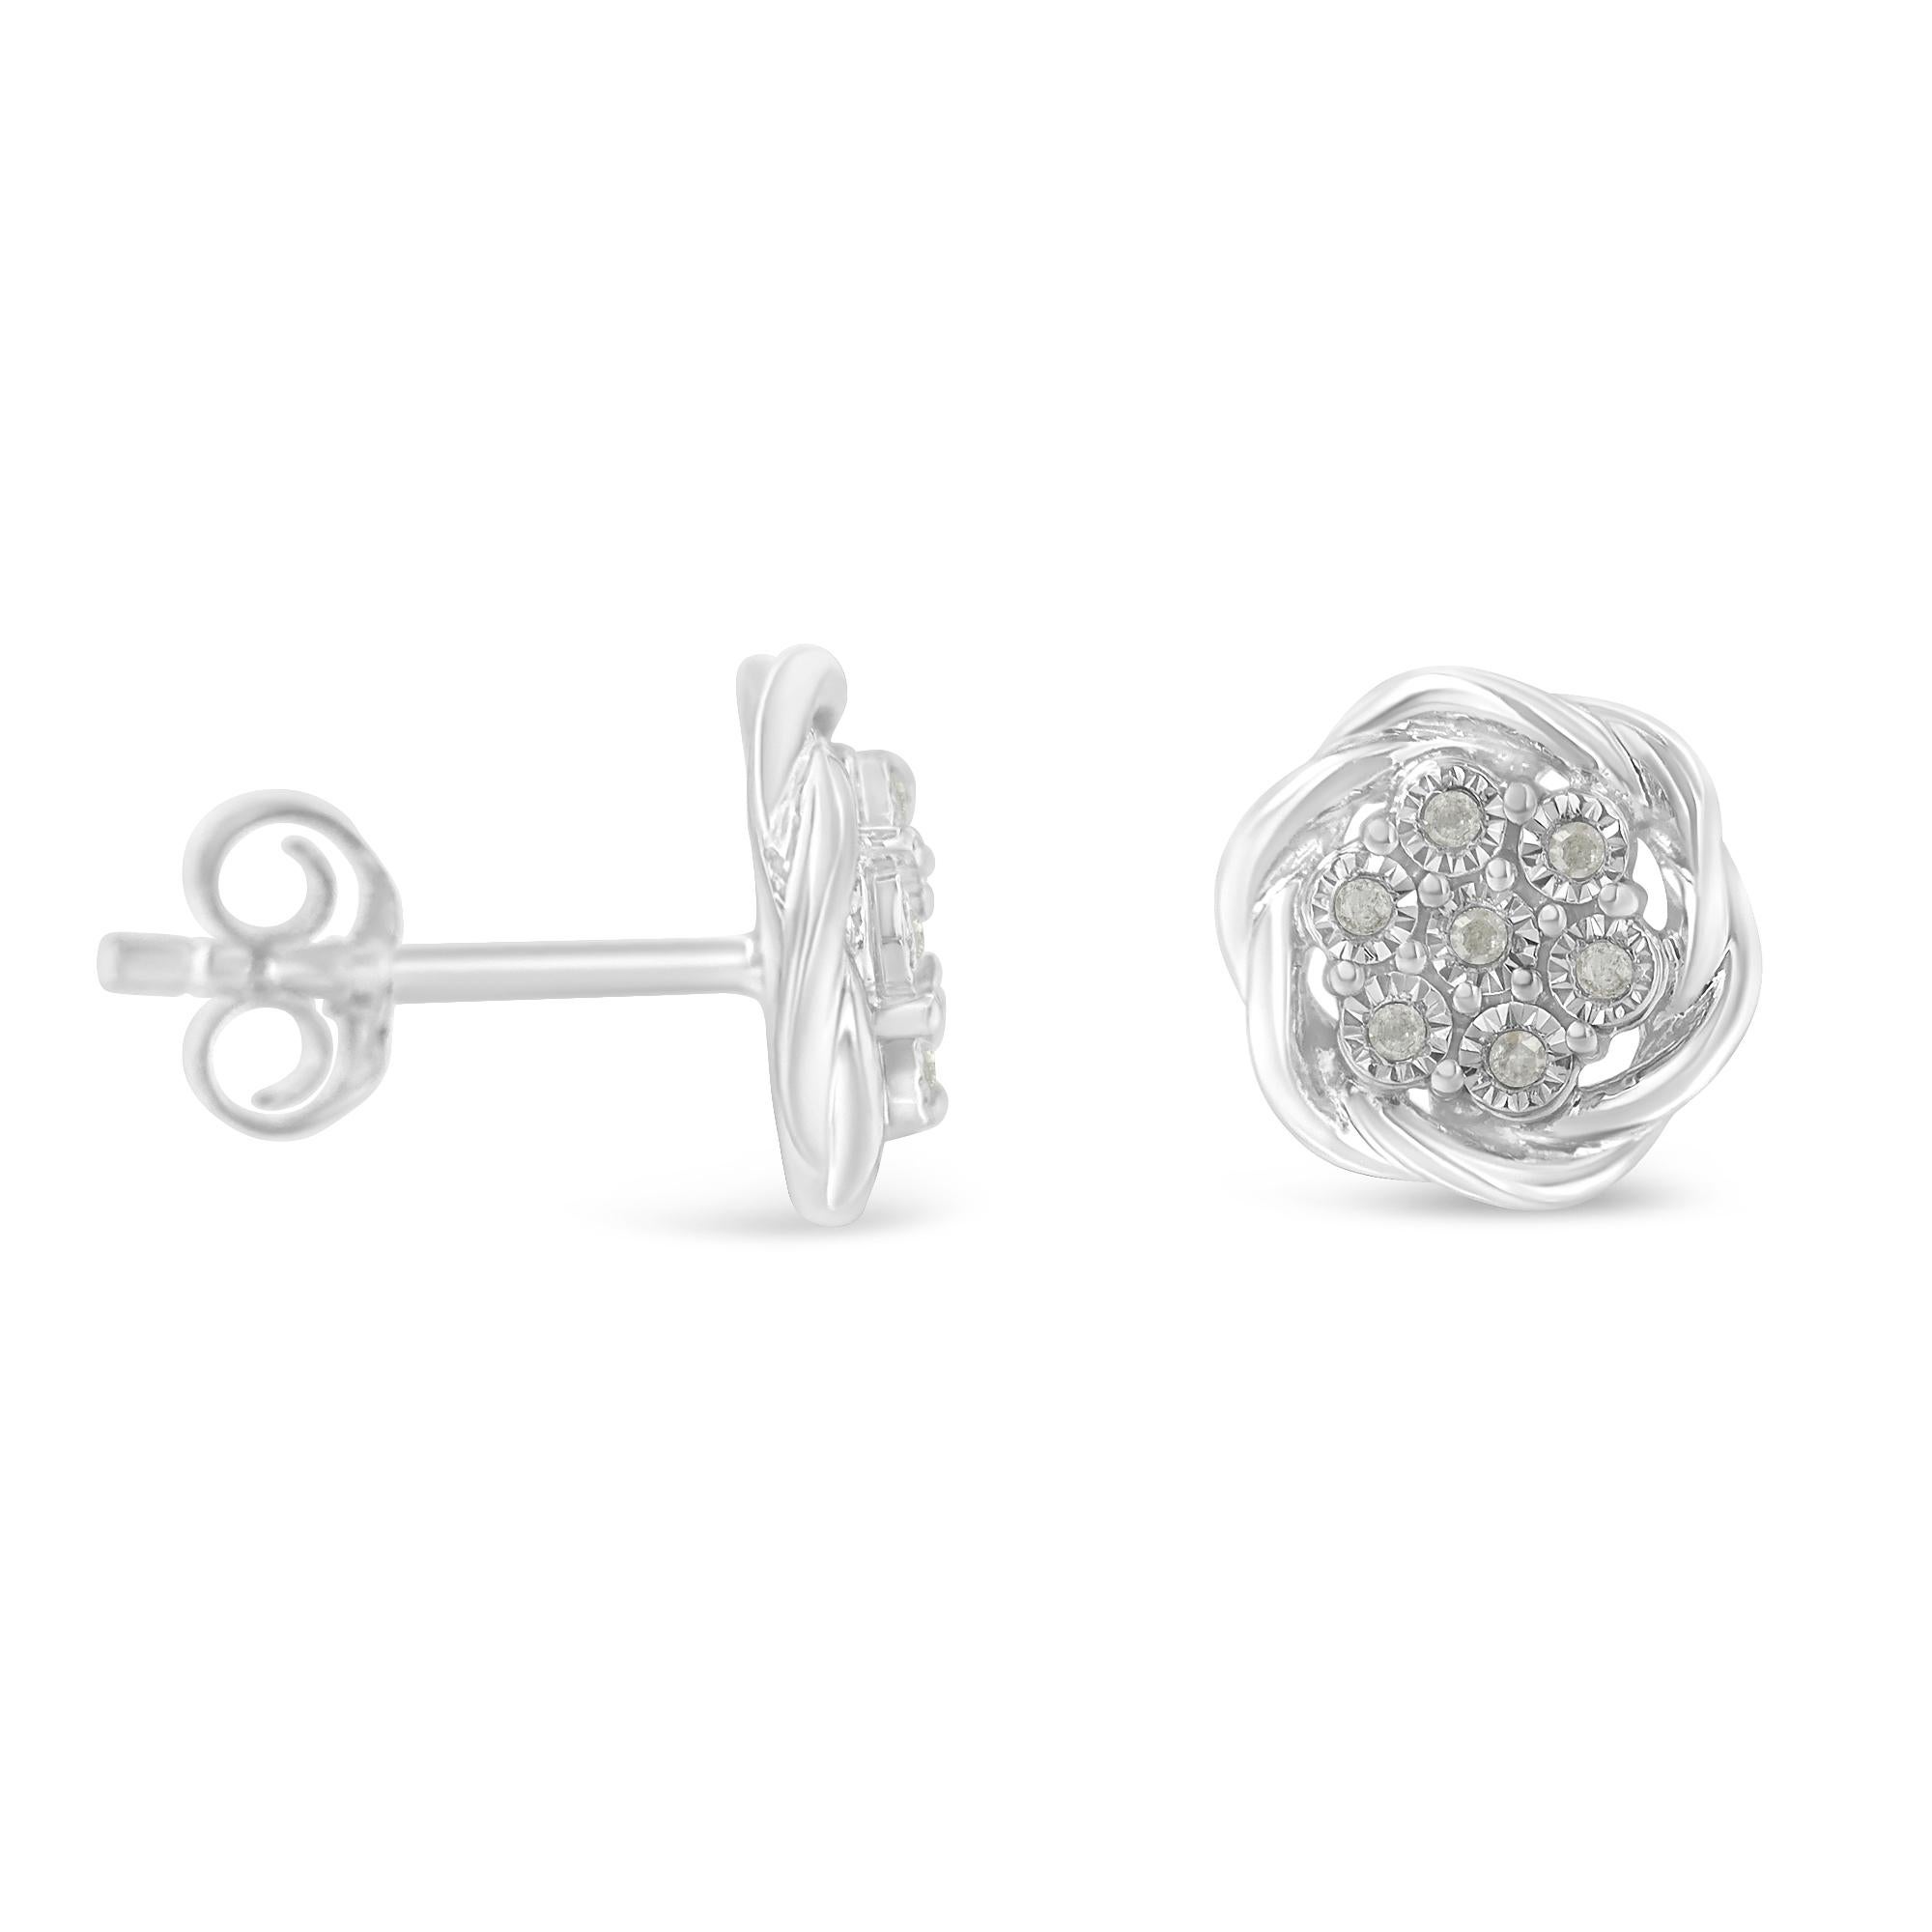 Feminine and delicate, add a touch of whimsical and romantic character to your evening wear or business ensemble with our Art Deco-inspired Sterling Silver Diamond Swirl Cluster Stud Earrings. Impeccably crafted, it features 14 pieces of round-cut